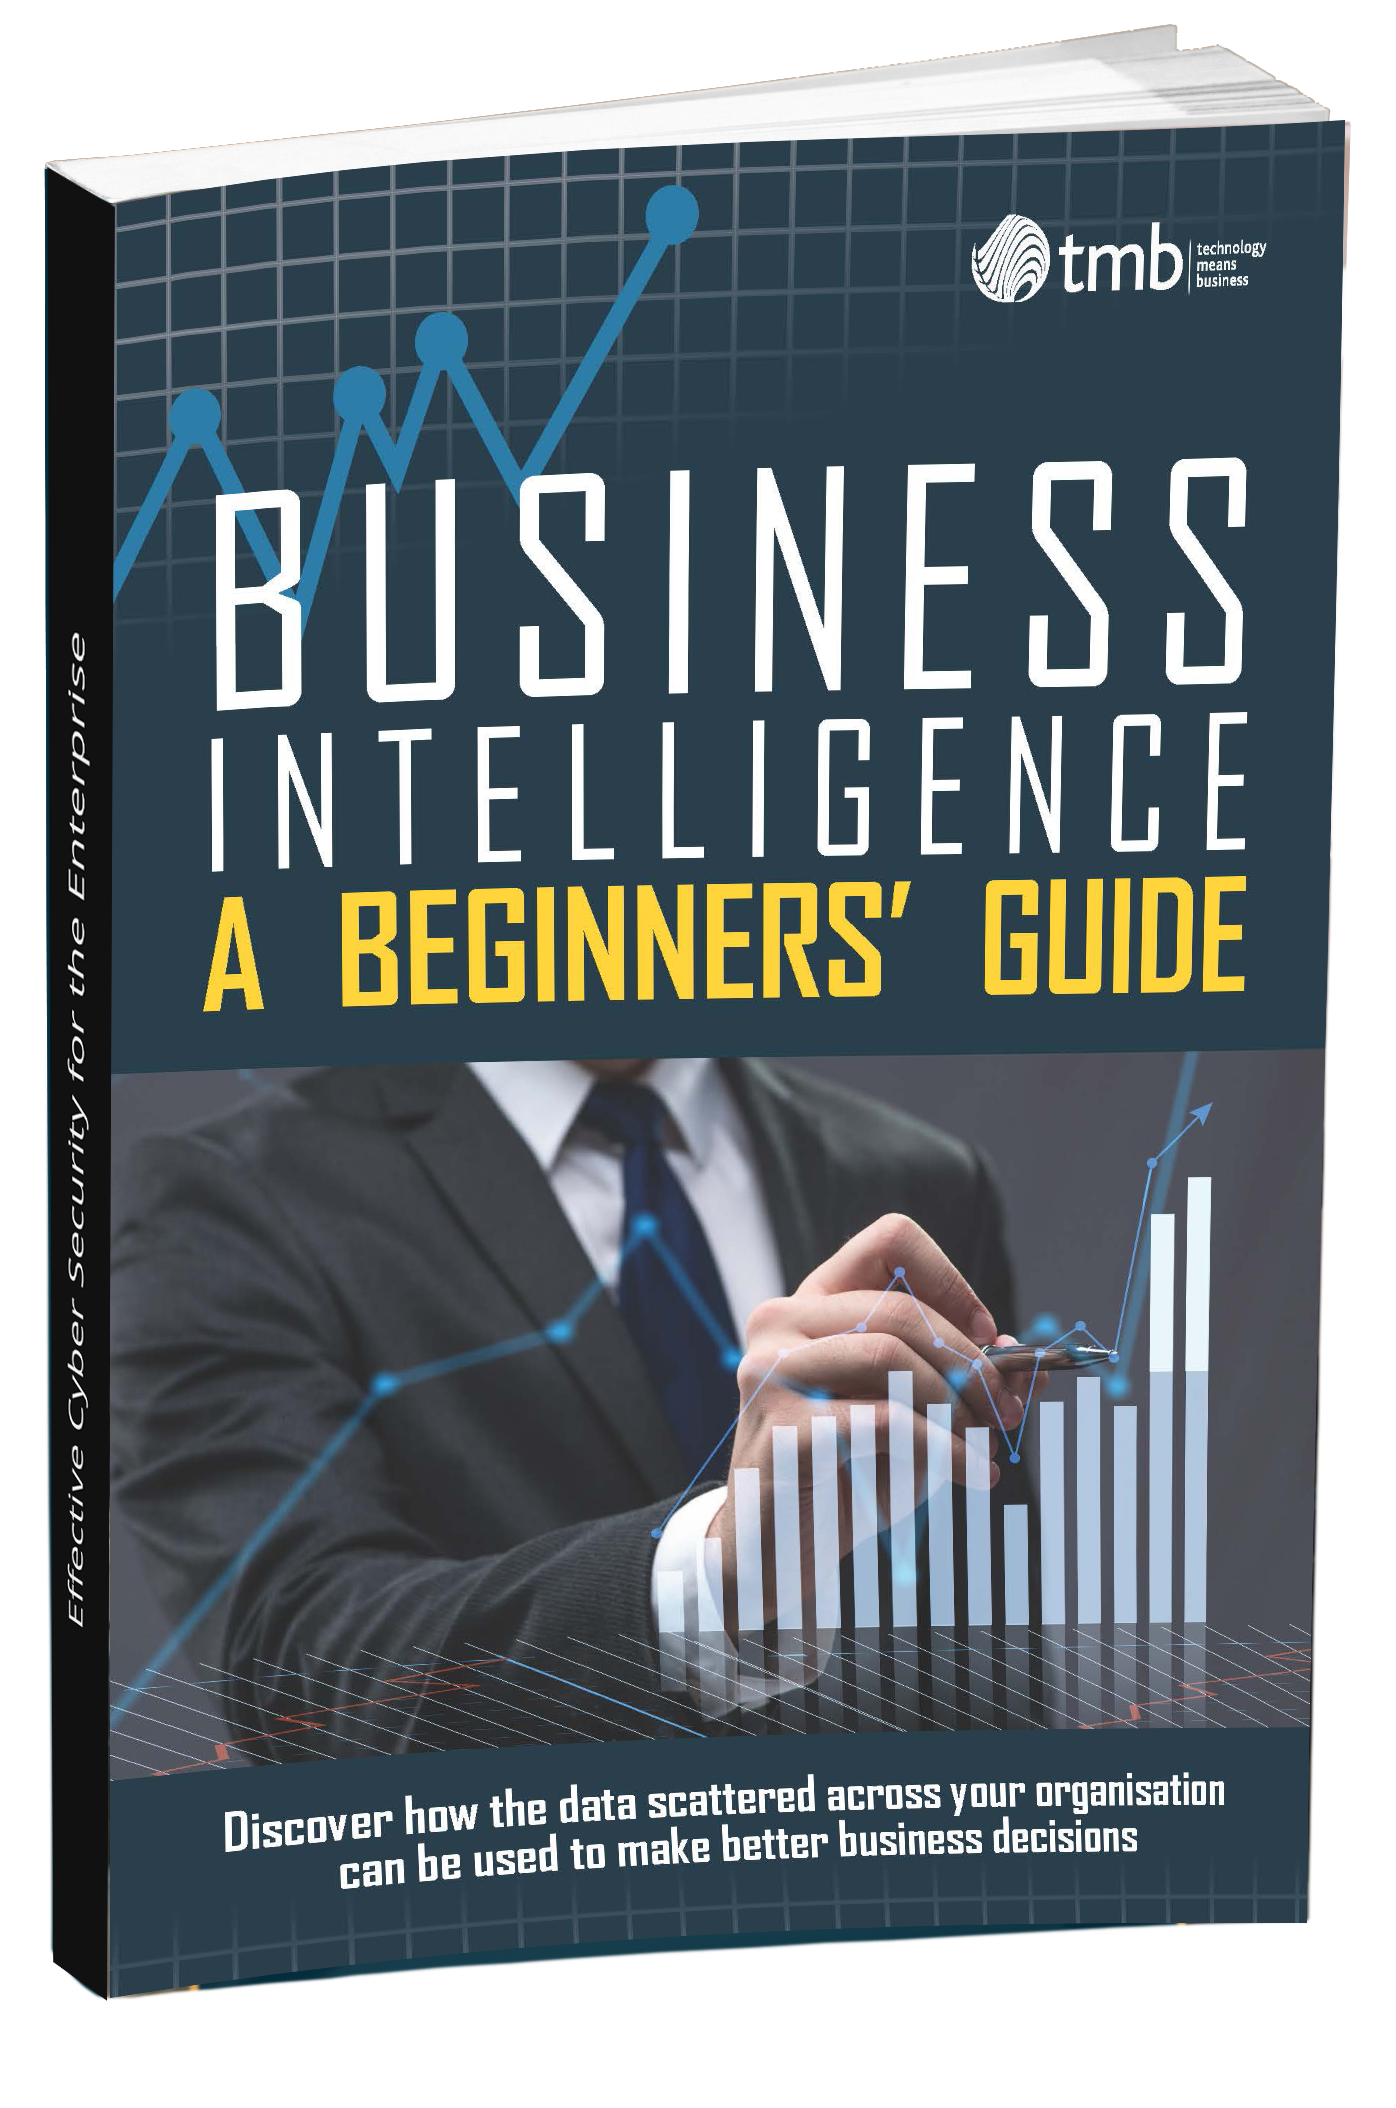 Business Intelligence guide